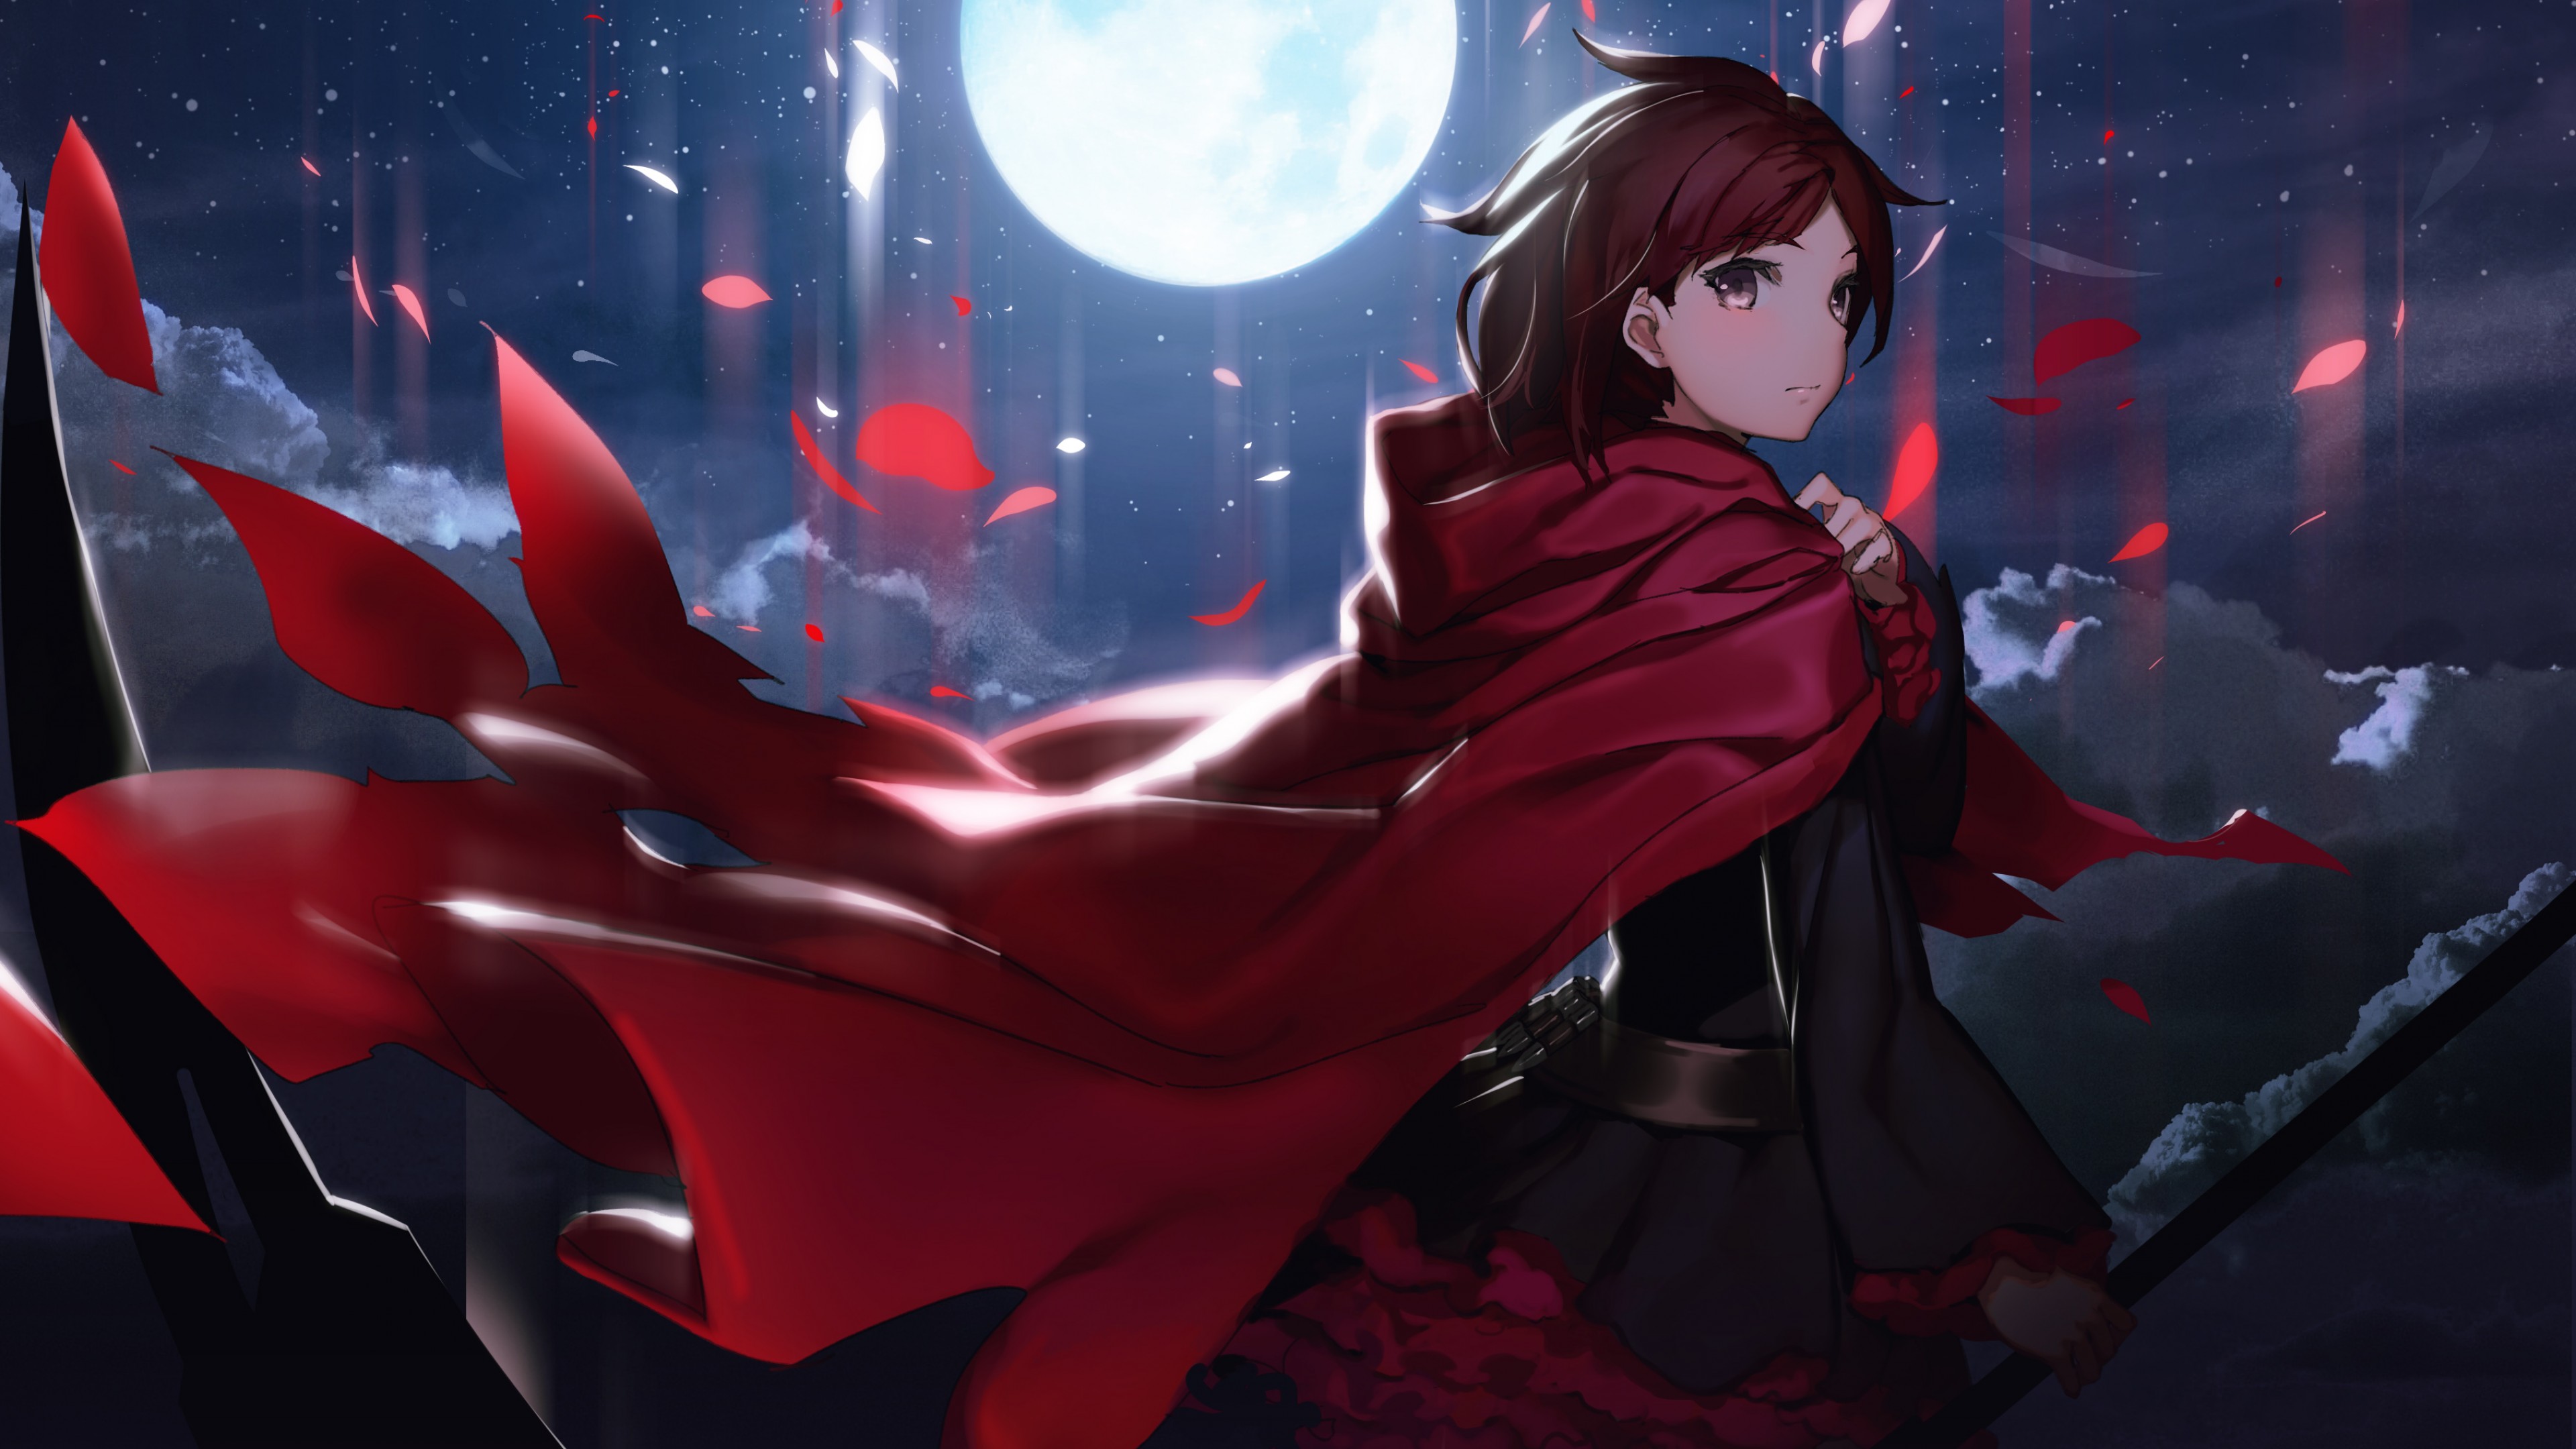 Free Download Ruby Eshi Full Moon Anime Girls 814 Wallpapers And